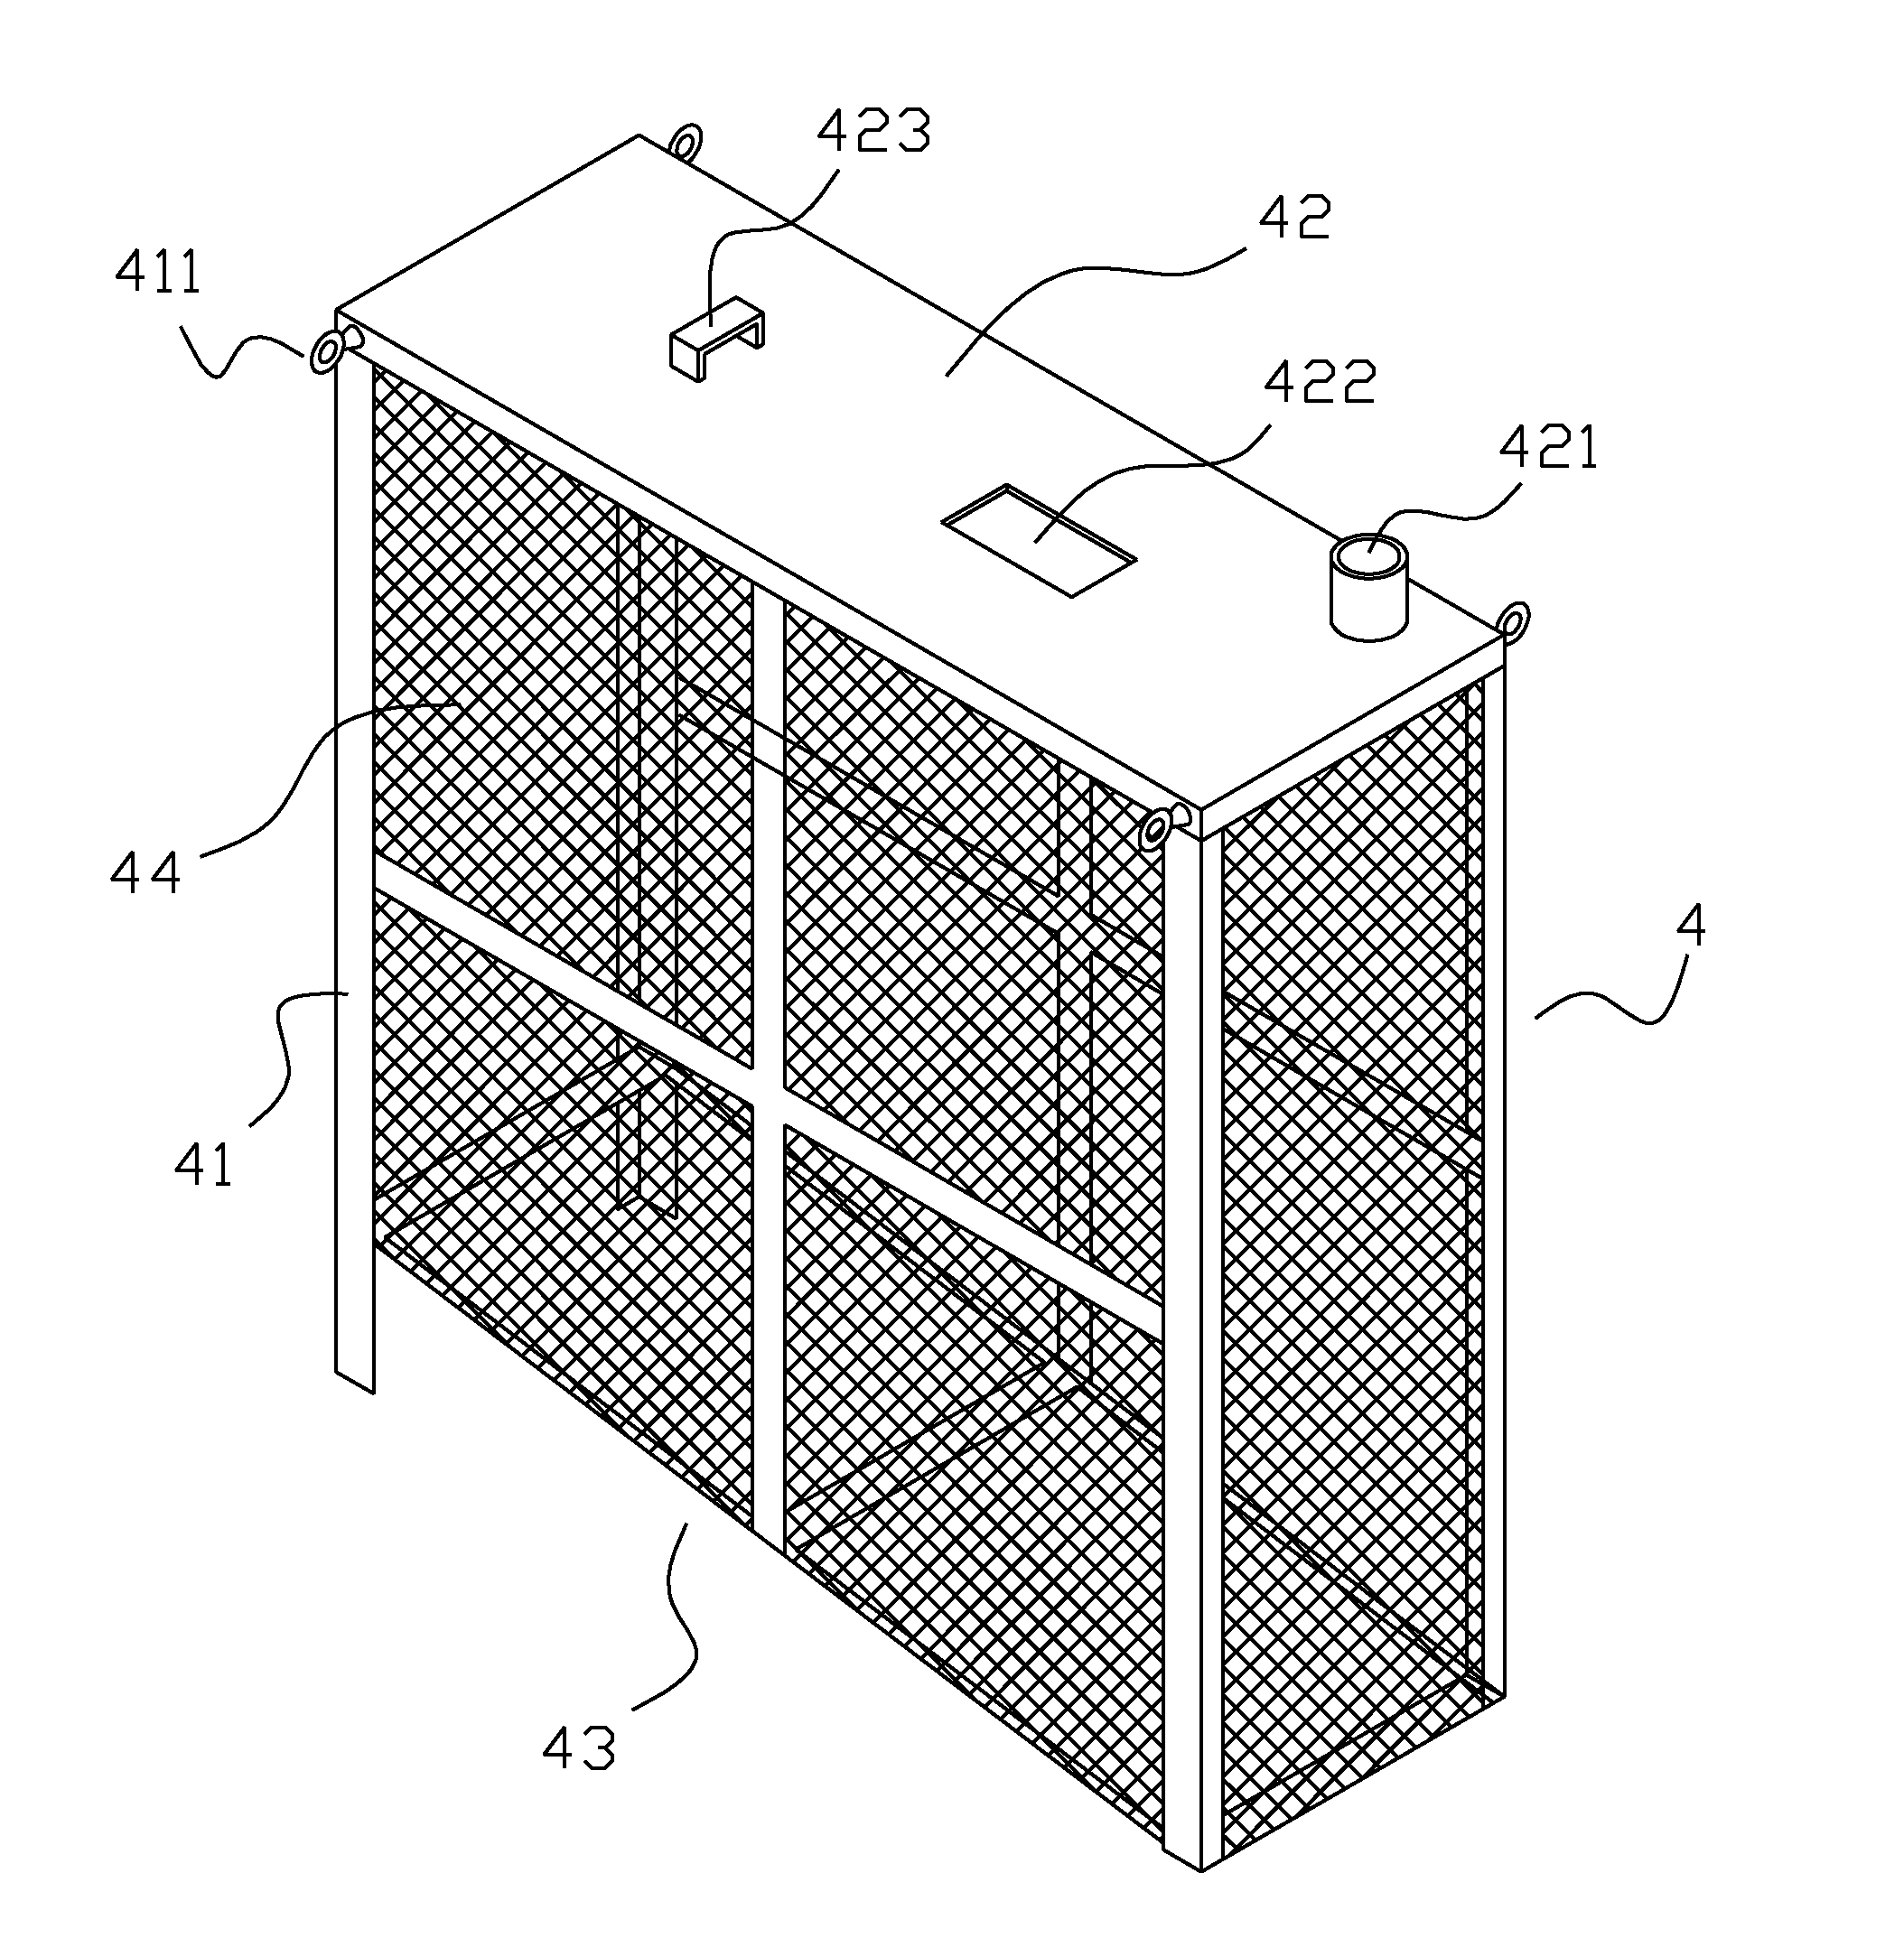 Filtration separation method for waste resin containing highly radioactive uranium powder and device thereof